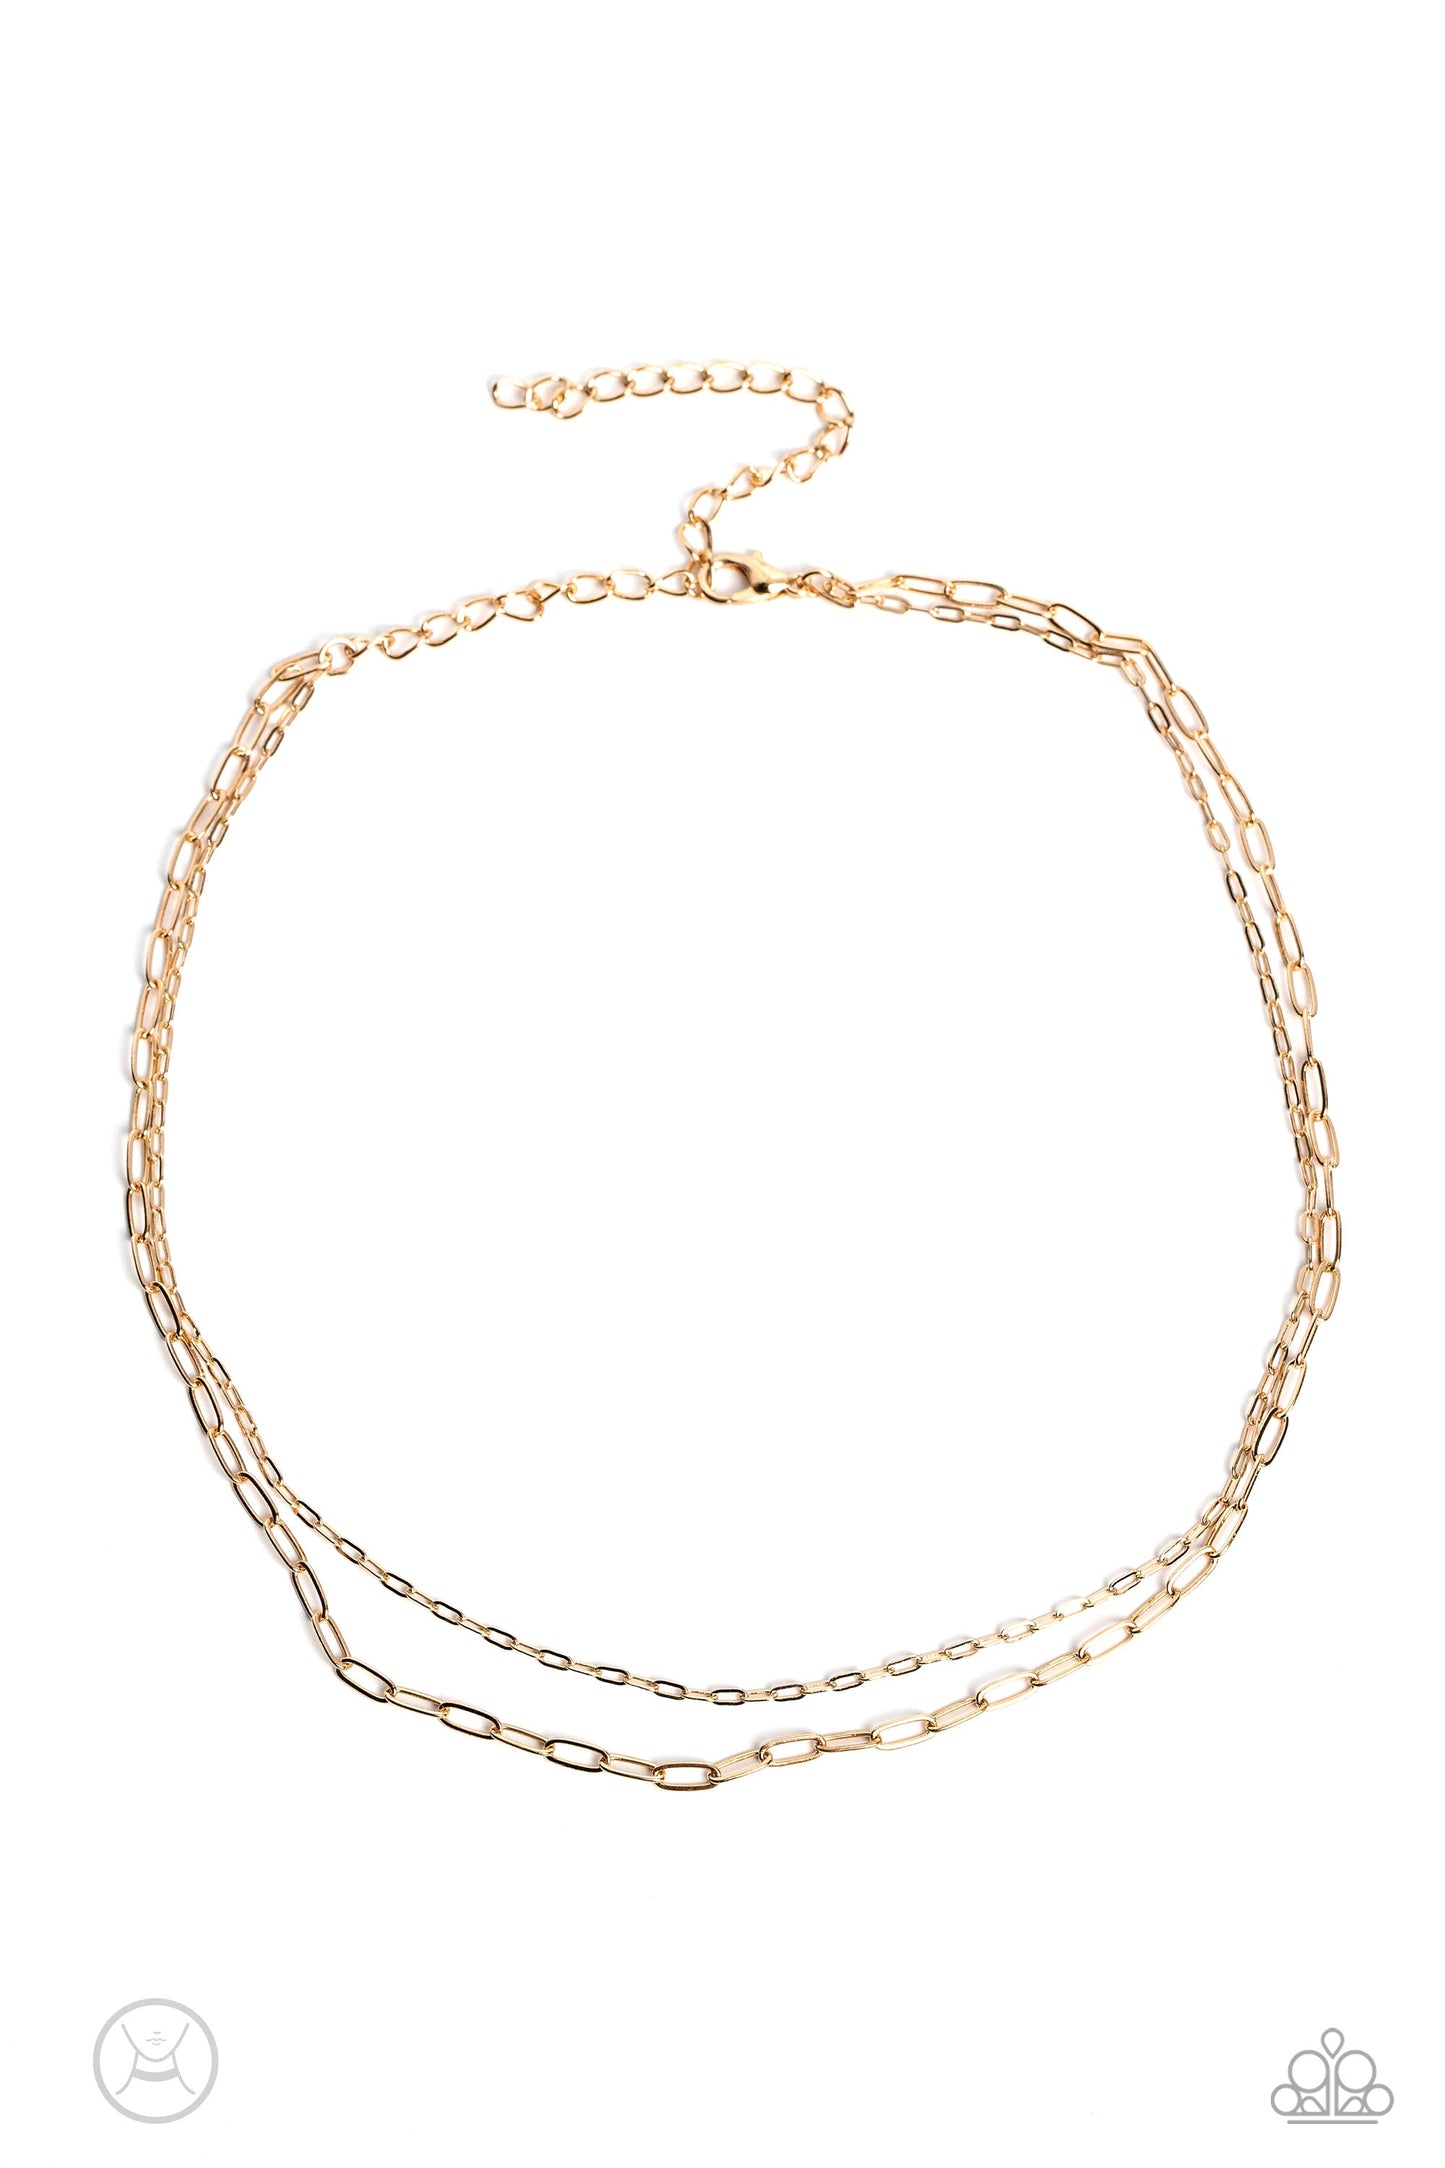 Polished Paperclips - Gold Paperclip Chain Paparazzi Choker Necklace & matching earrings